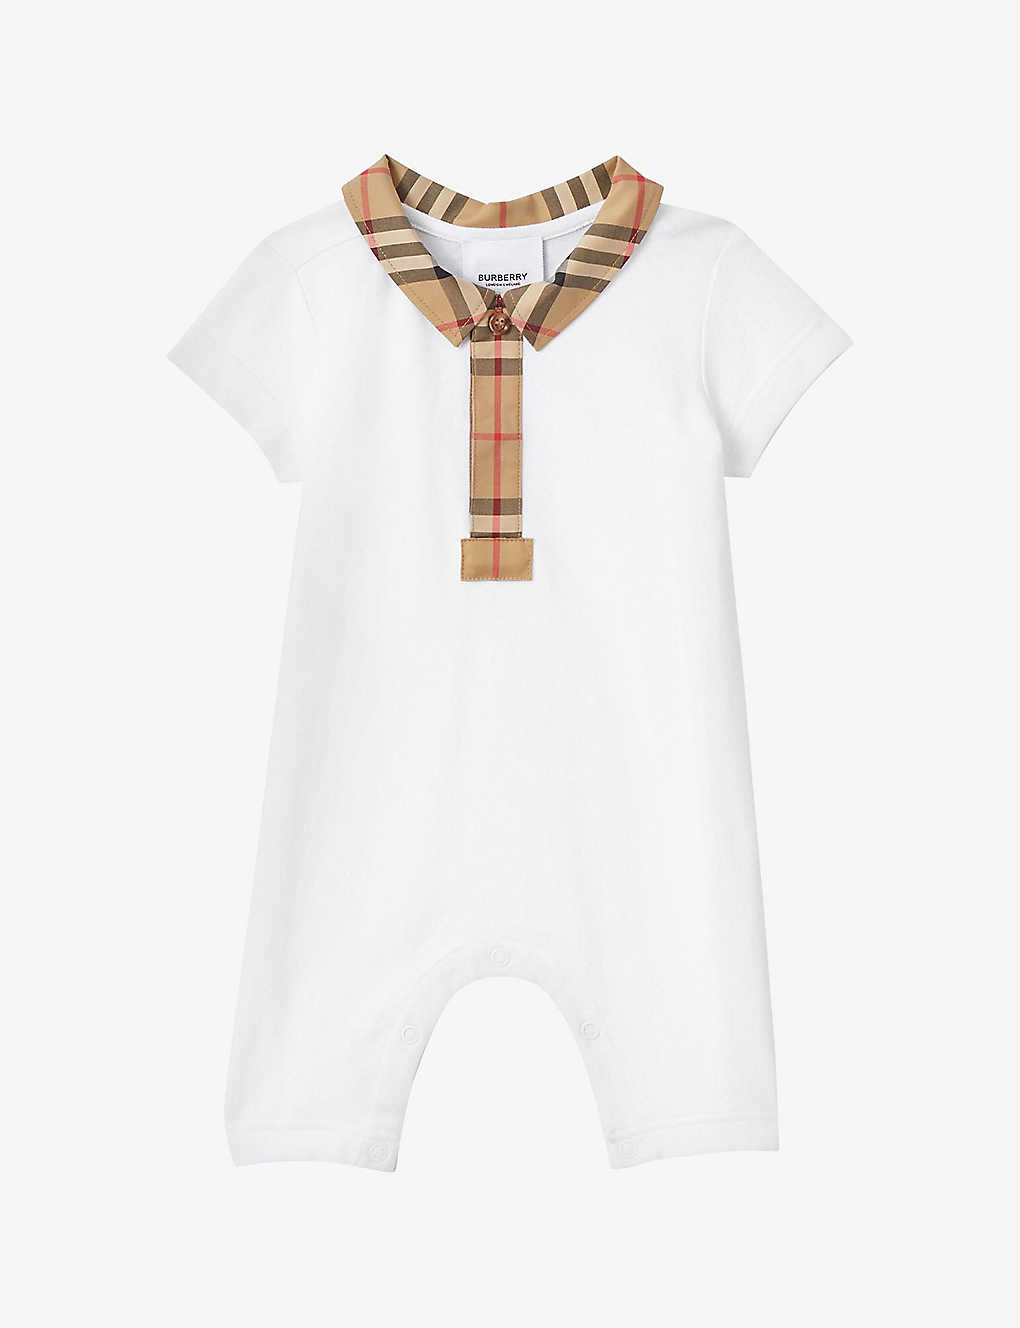 Selfridges & Co Clothing Loungewear Sleepsuits 12 months Charli vintage check-trim stretch-cotton baby grow 1 month 